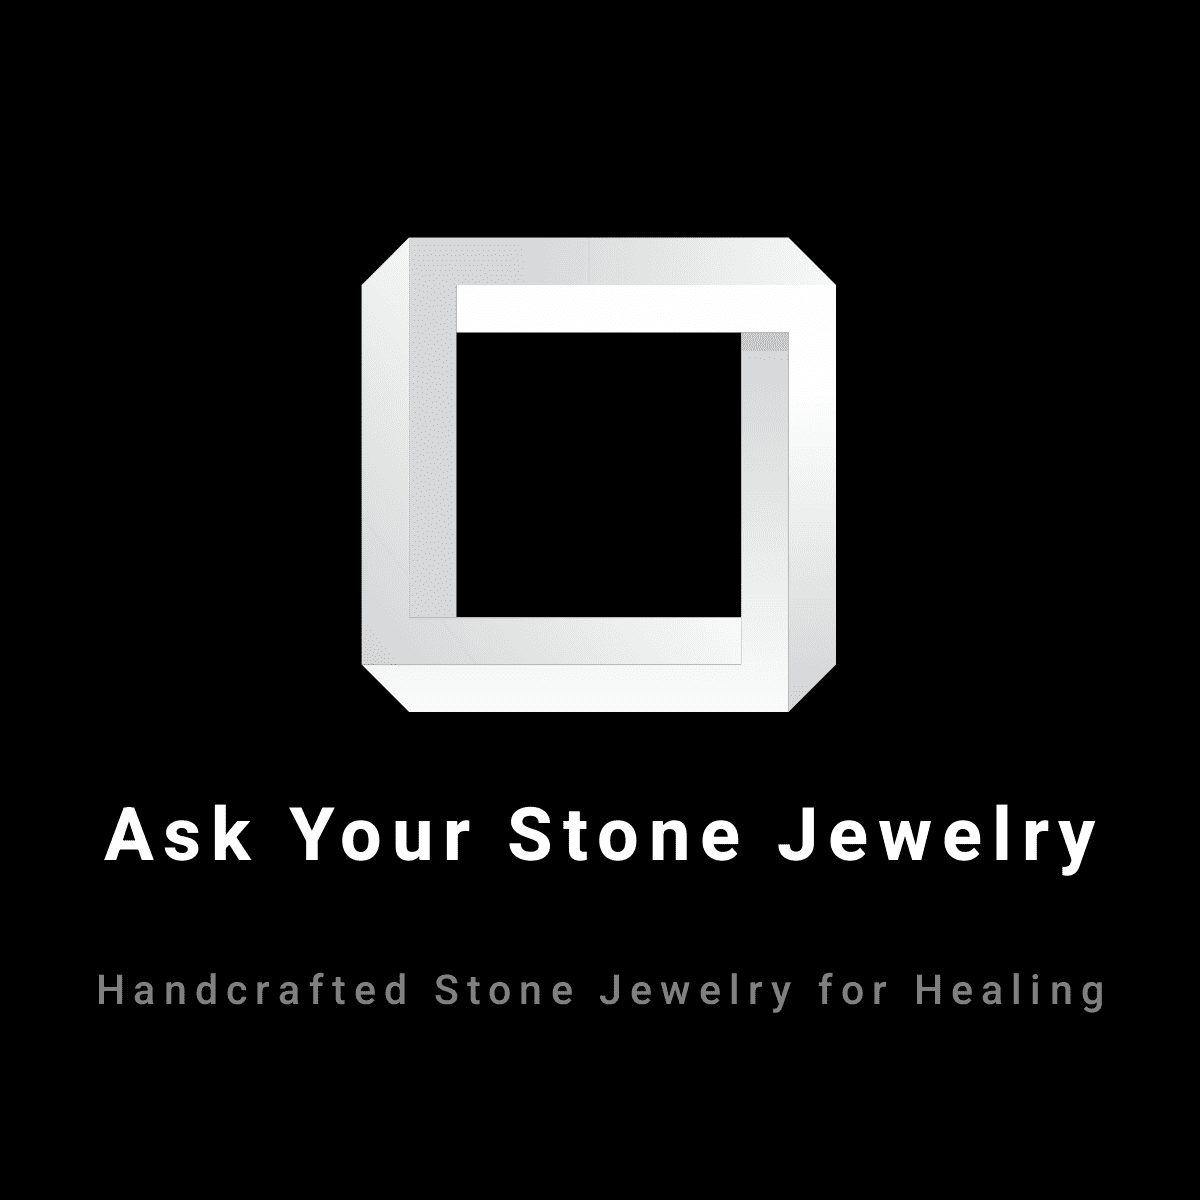 Load video: Introducing Ask Your Stone Jewelry!!